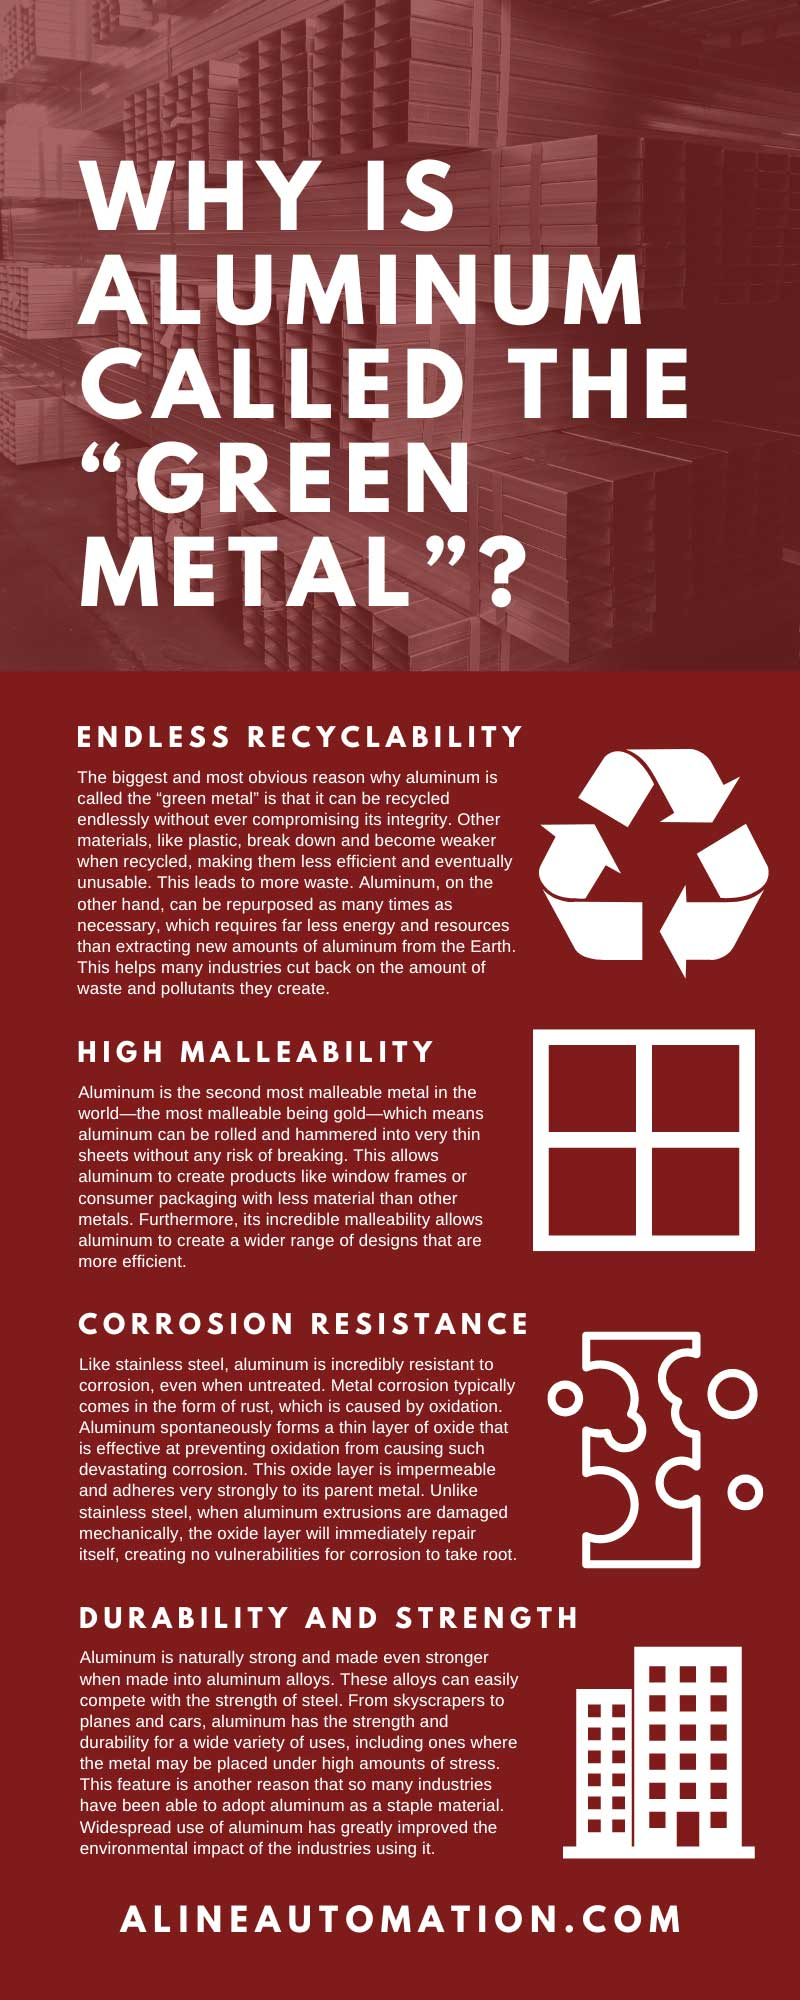 why is aluminum called the green metal_infographic